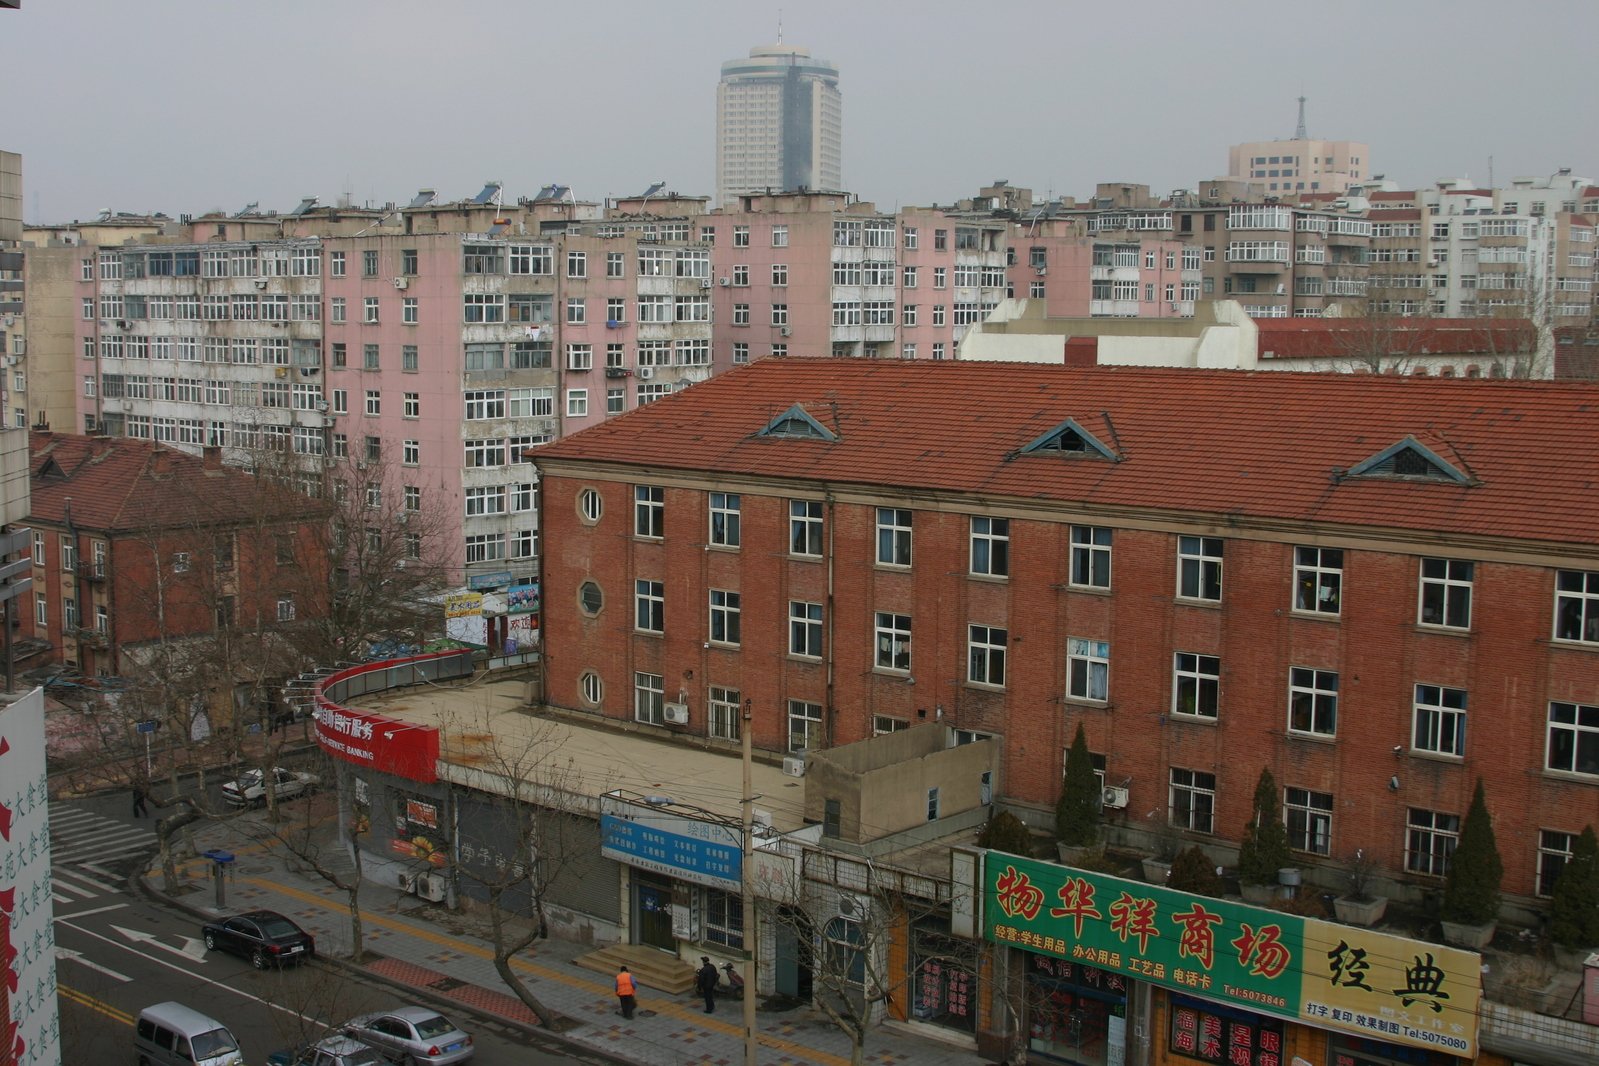 a view from a building with several buildings in the background